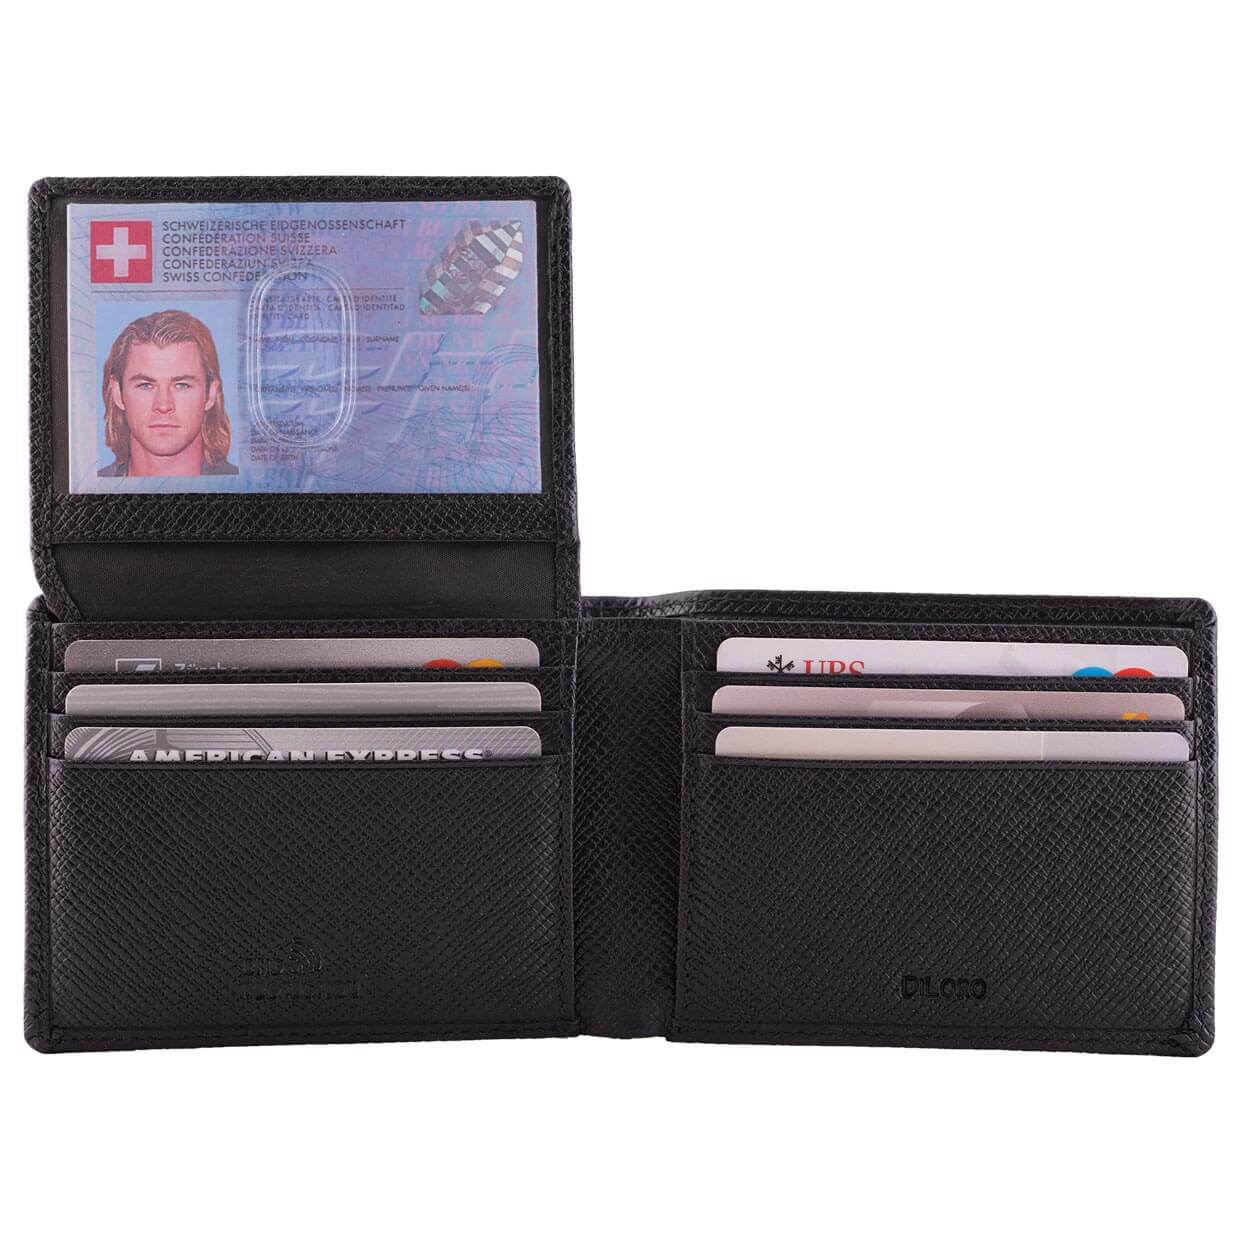 A slim bifold wallet made from genuine Saffiano leather with RFID blocking technology and two ID windows - Open View with ID Window Open